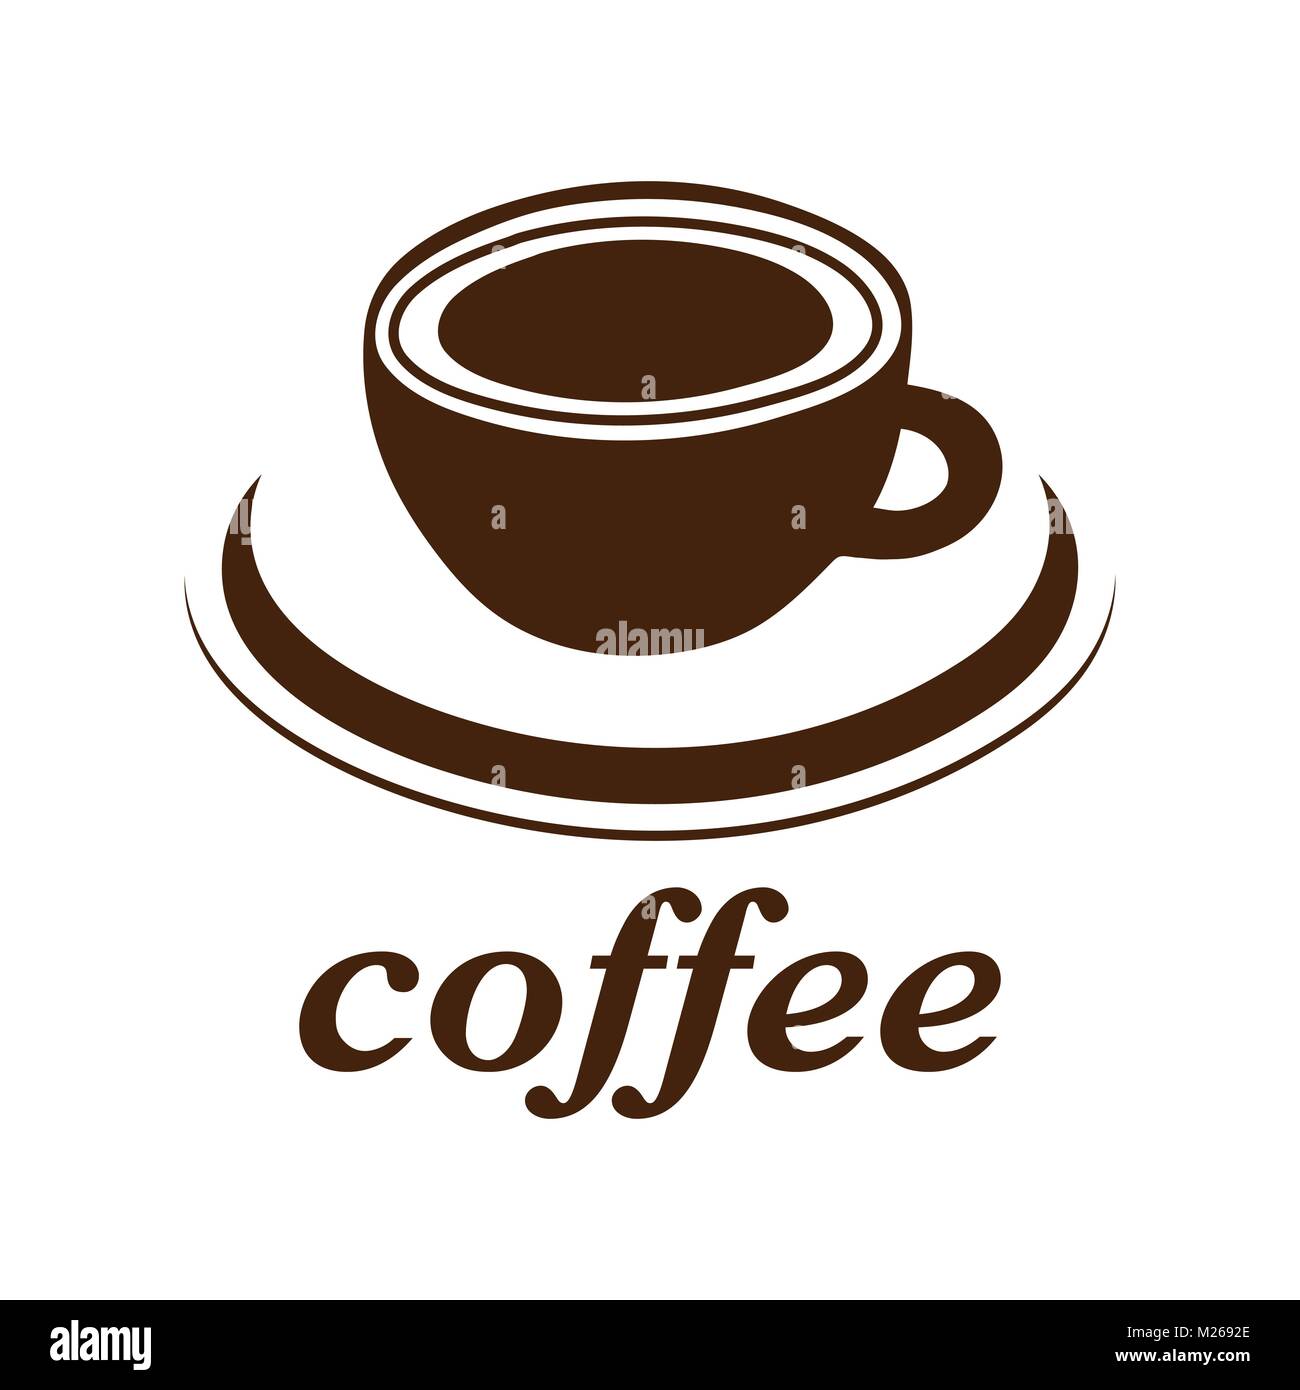 Cup of coffee vector icon, logo, sign, emblem. Brown abstract coffee cup and saucer and the inscription, isolated on white background Stock Vector